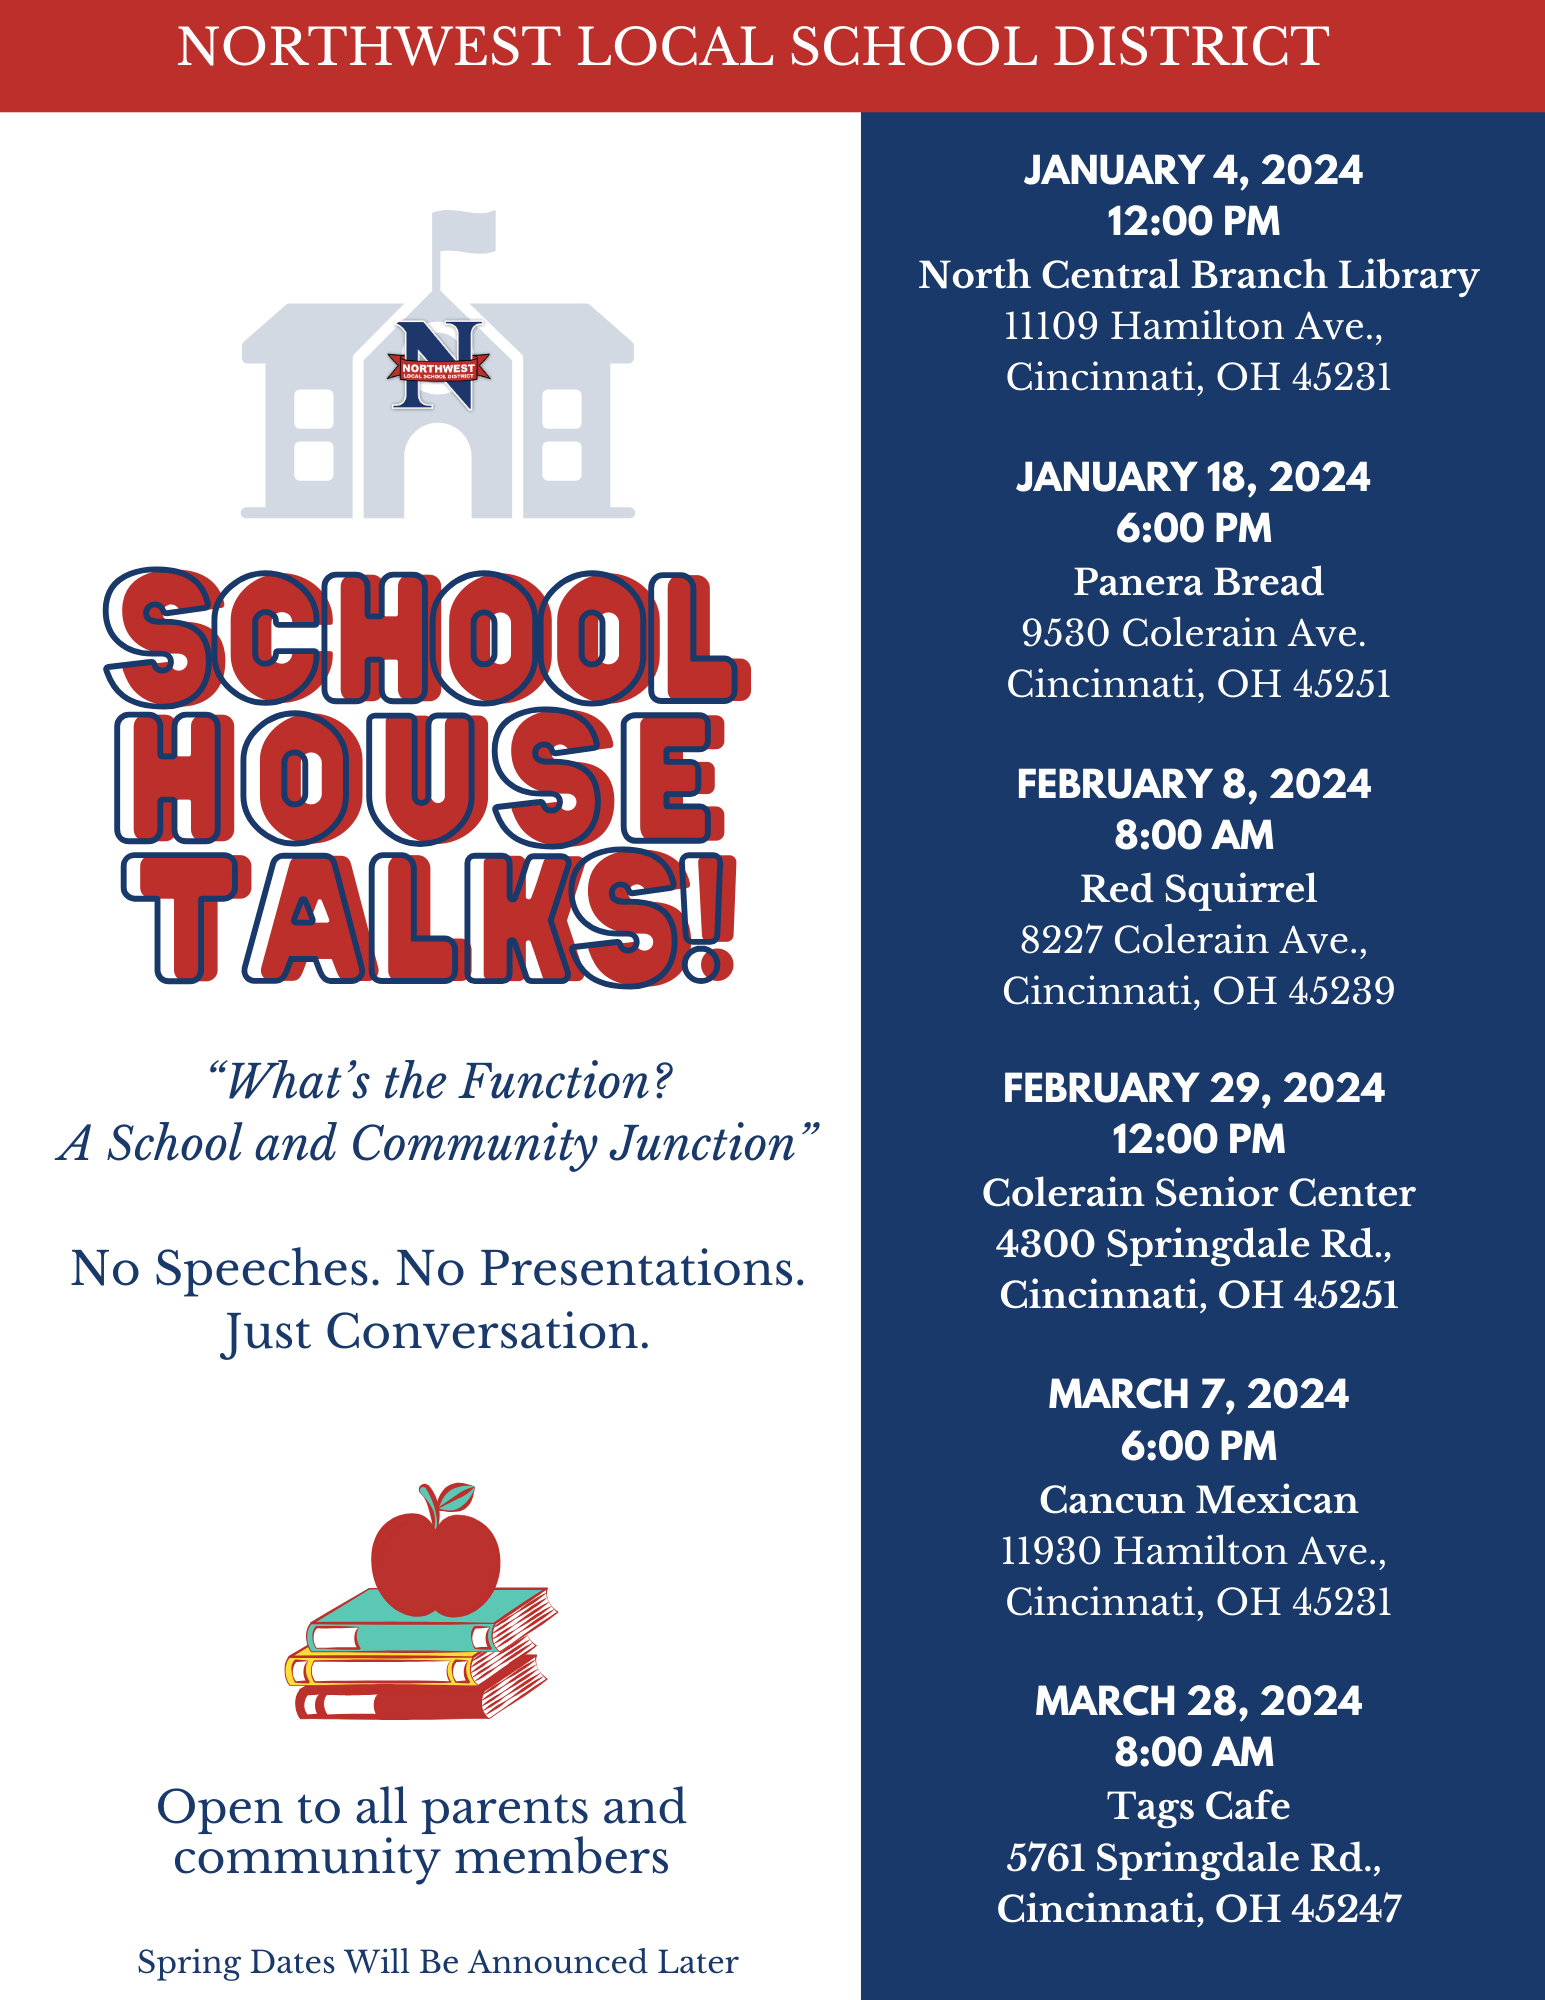 Want to talk face to face with Superintendent Yater?  Join us for School House Talks!     SPRING DATES ARE LISTED BELOW.    Mr. Yater will be visiting local restaurants, community centers, churches, etc. to meet and speak face-to-face with parents and community members.    Open to all parents and community members.   January 4, 2024  12:00 PM  North Central Branch Library  11109 Hamilton Ave.,  Cincinnati, OH 45231   January 18, 2024  6:00 PM  Panera Bread  9530 Colerain Ave.  Cincinnati, OH 45251   February 8, 2024  8:00 AM  Red Squirrel  8227 Colerain Ave.,  Cincinnati, OH 45239   February 29, 2024  12:00 PM  Colerain Senior Center  4300 Springdale Rd.,  Cincinnati, OH 45251   March 7, 2024  6:00 PM  Cancun Mexican  11930 Hamilton Ave.,  Cincinnati, OH 45231   March 28, 2024  8:00 AM  Tags Cafe  5761 Springdale Rd.,  Cincinnati, OH 45247